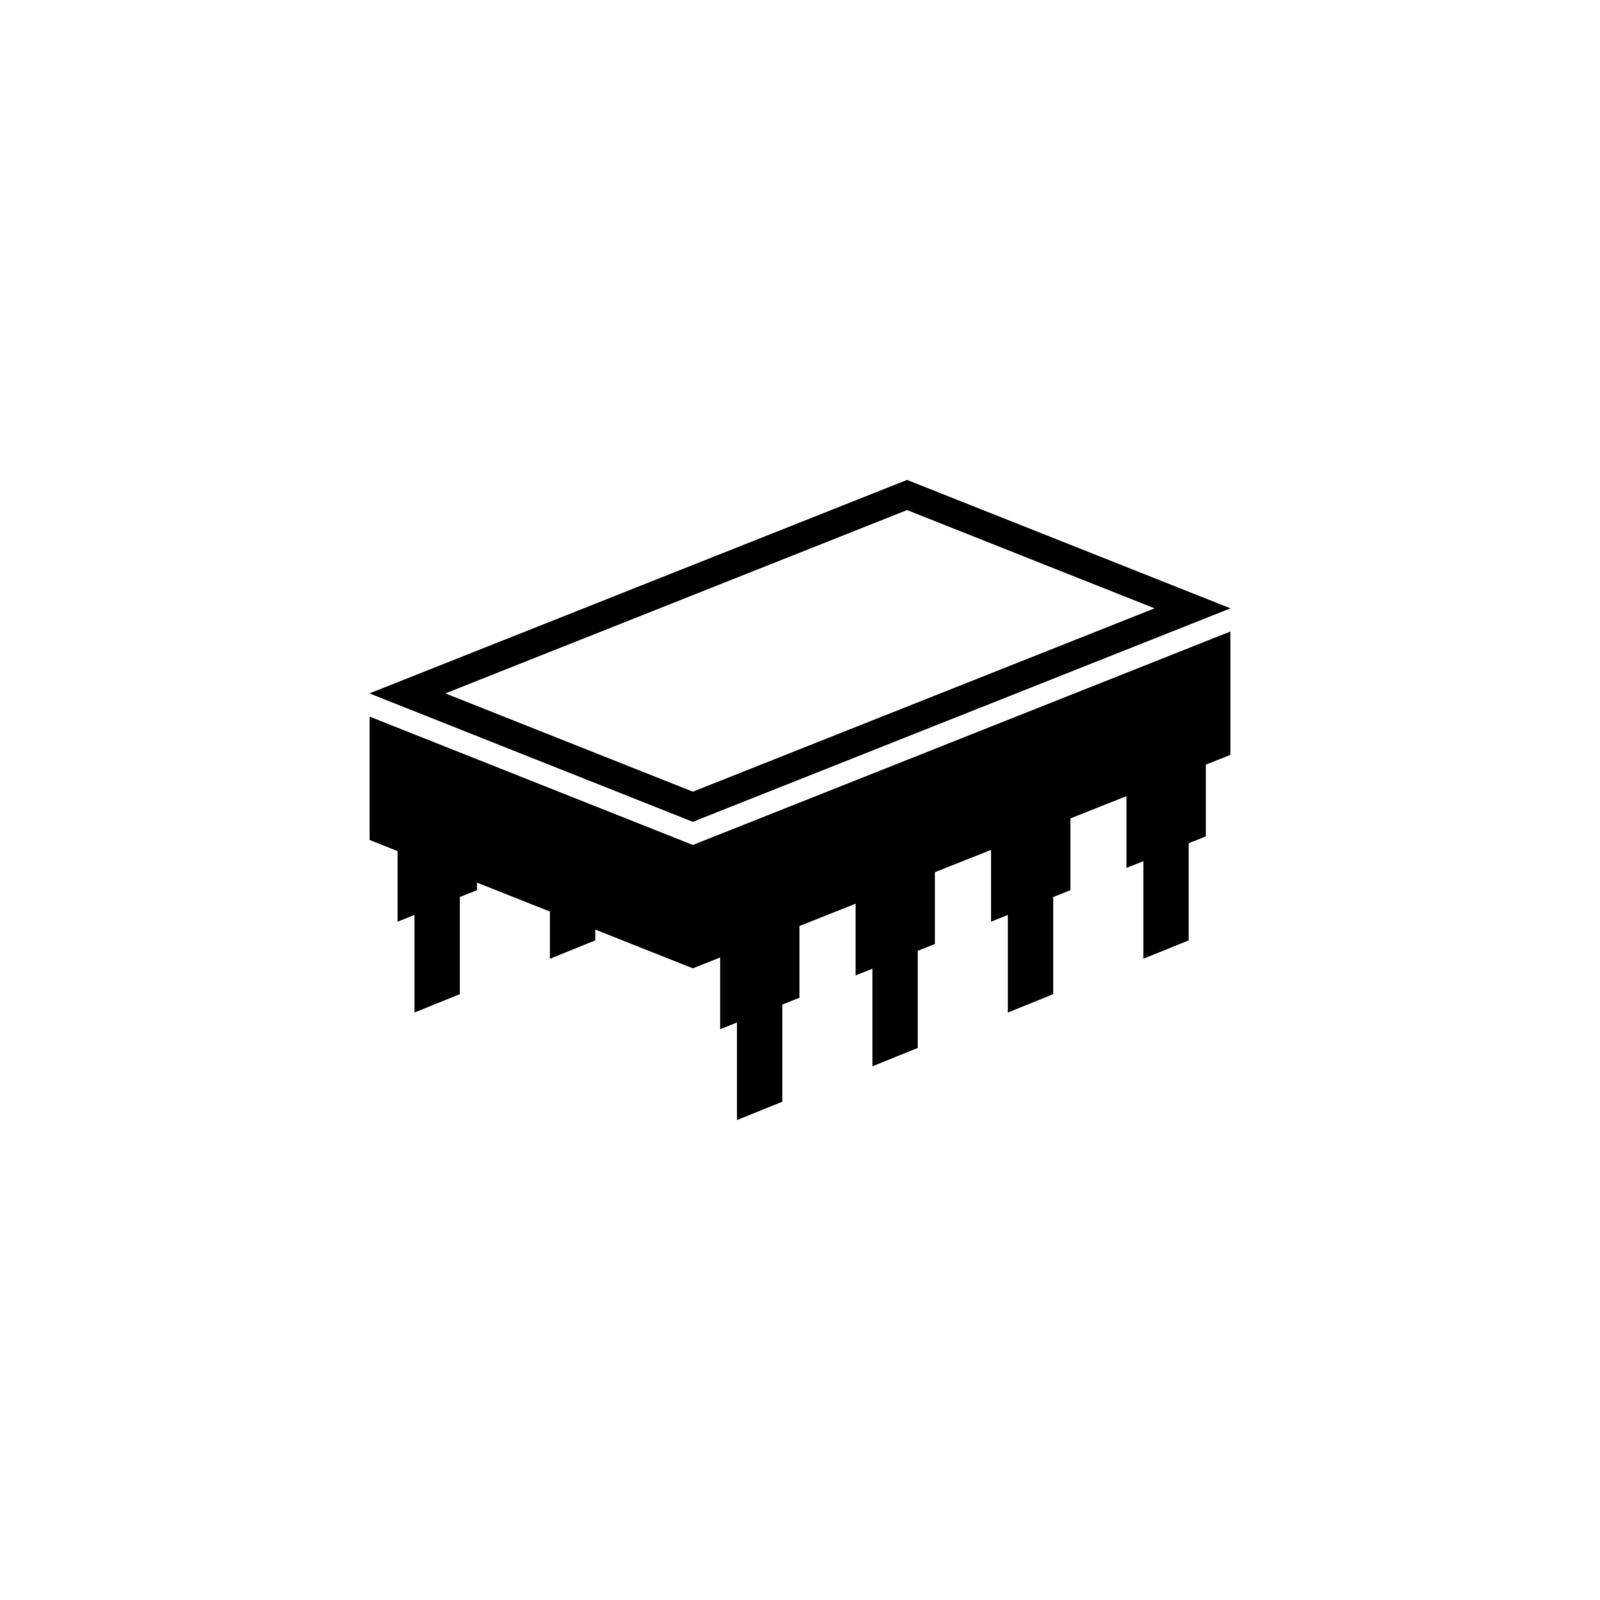 Microchip. Flat Vector Icon. Simple black symbol on white background